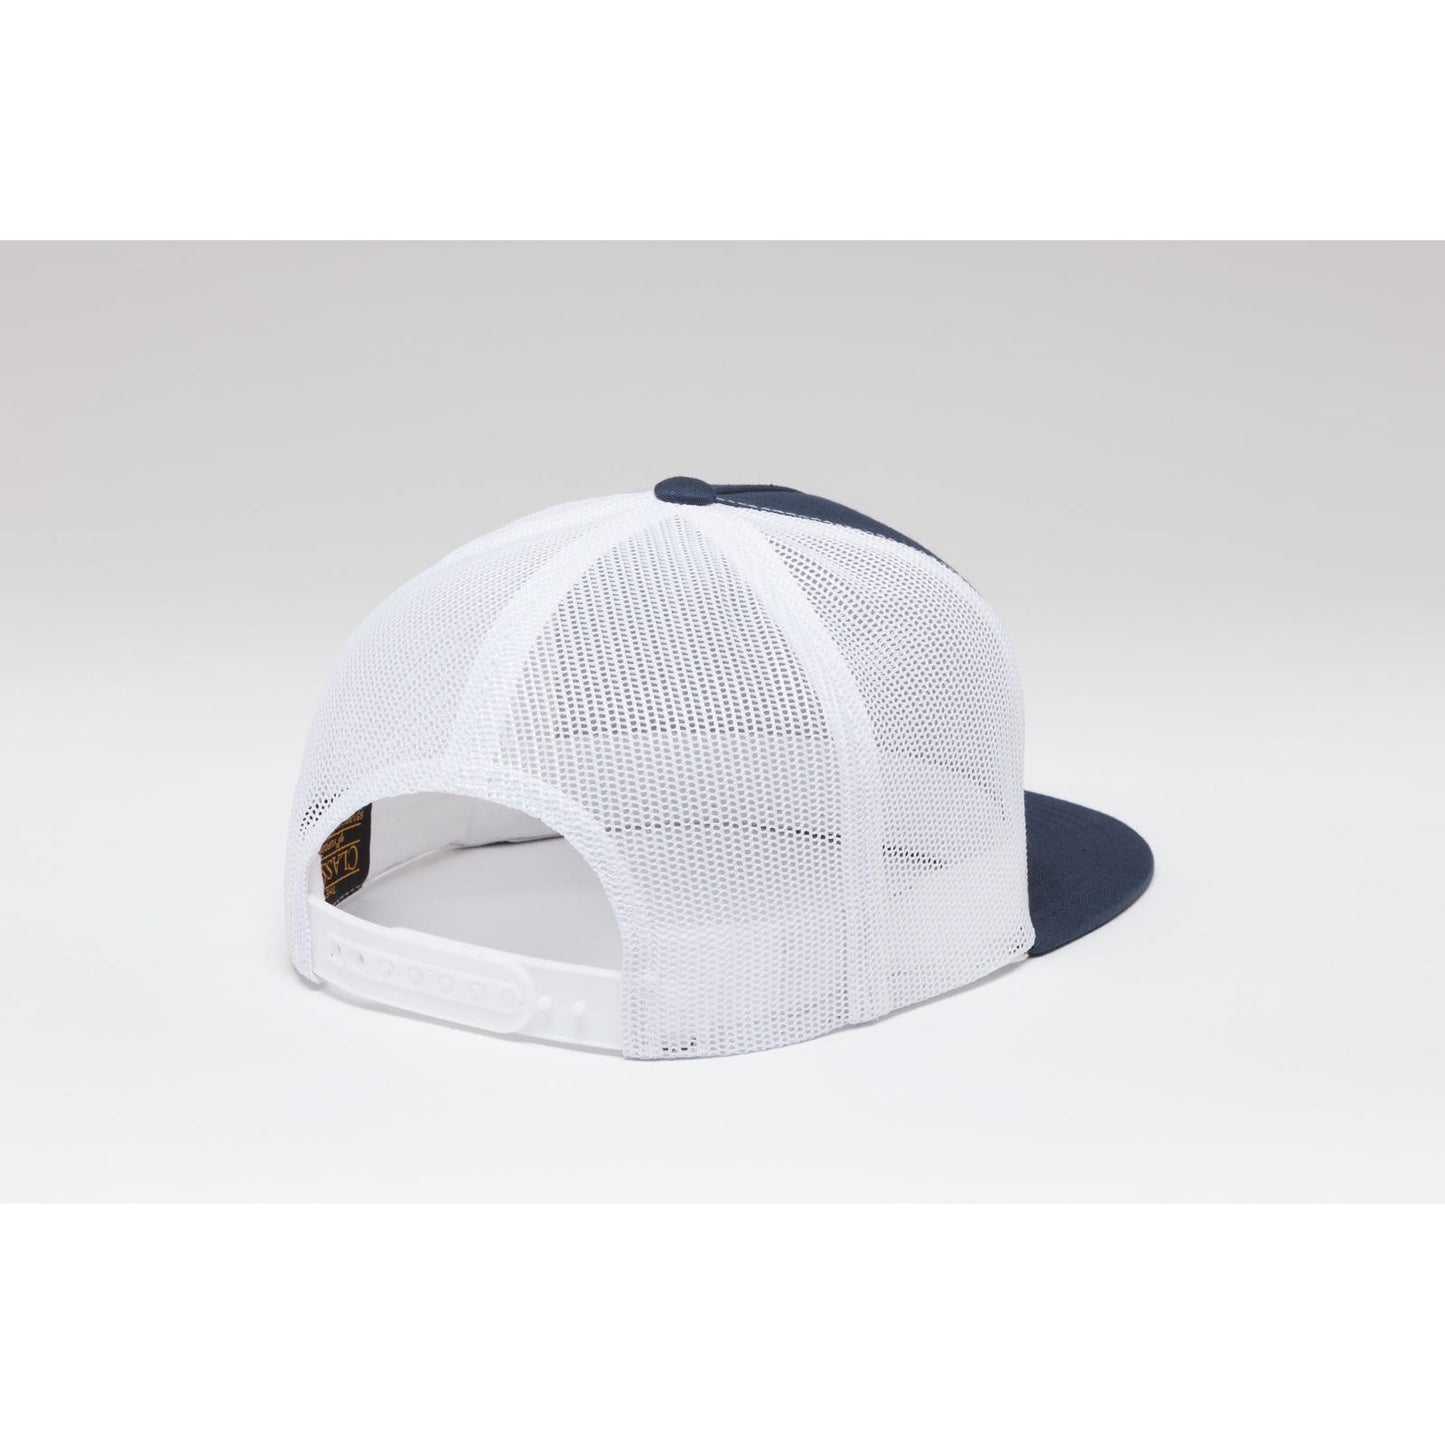 Kimes Ranch Banner Ventilated Hat Navy/White